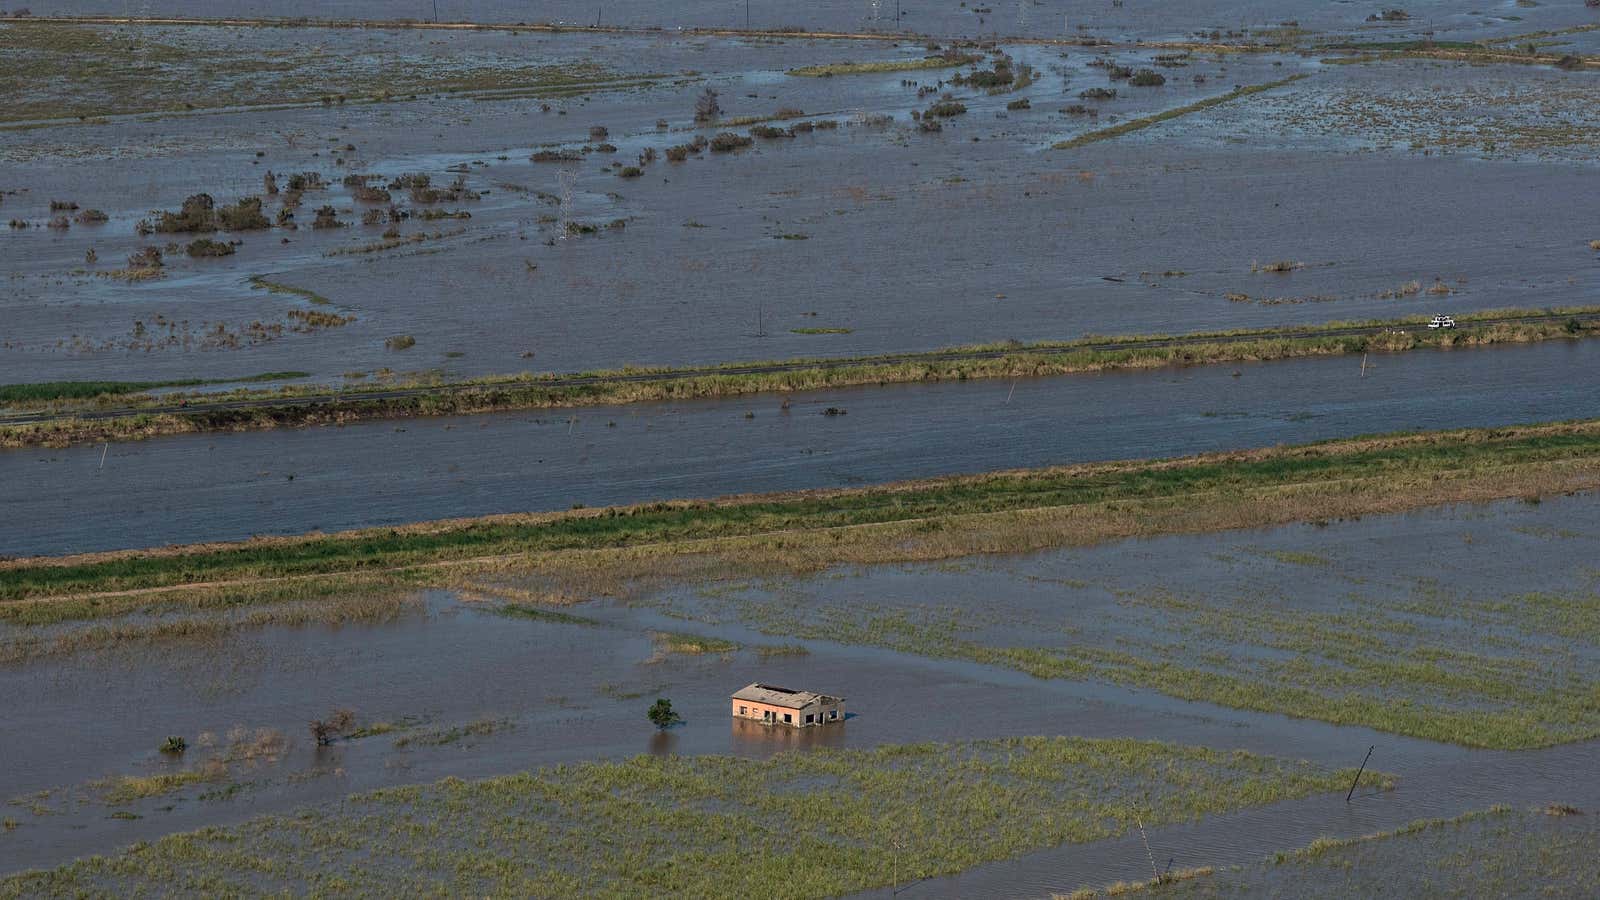 A home surrounded by flood waters in Beira on March 24.